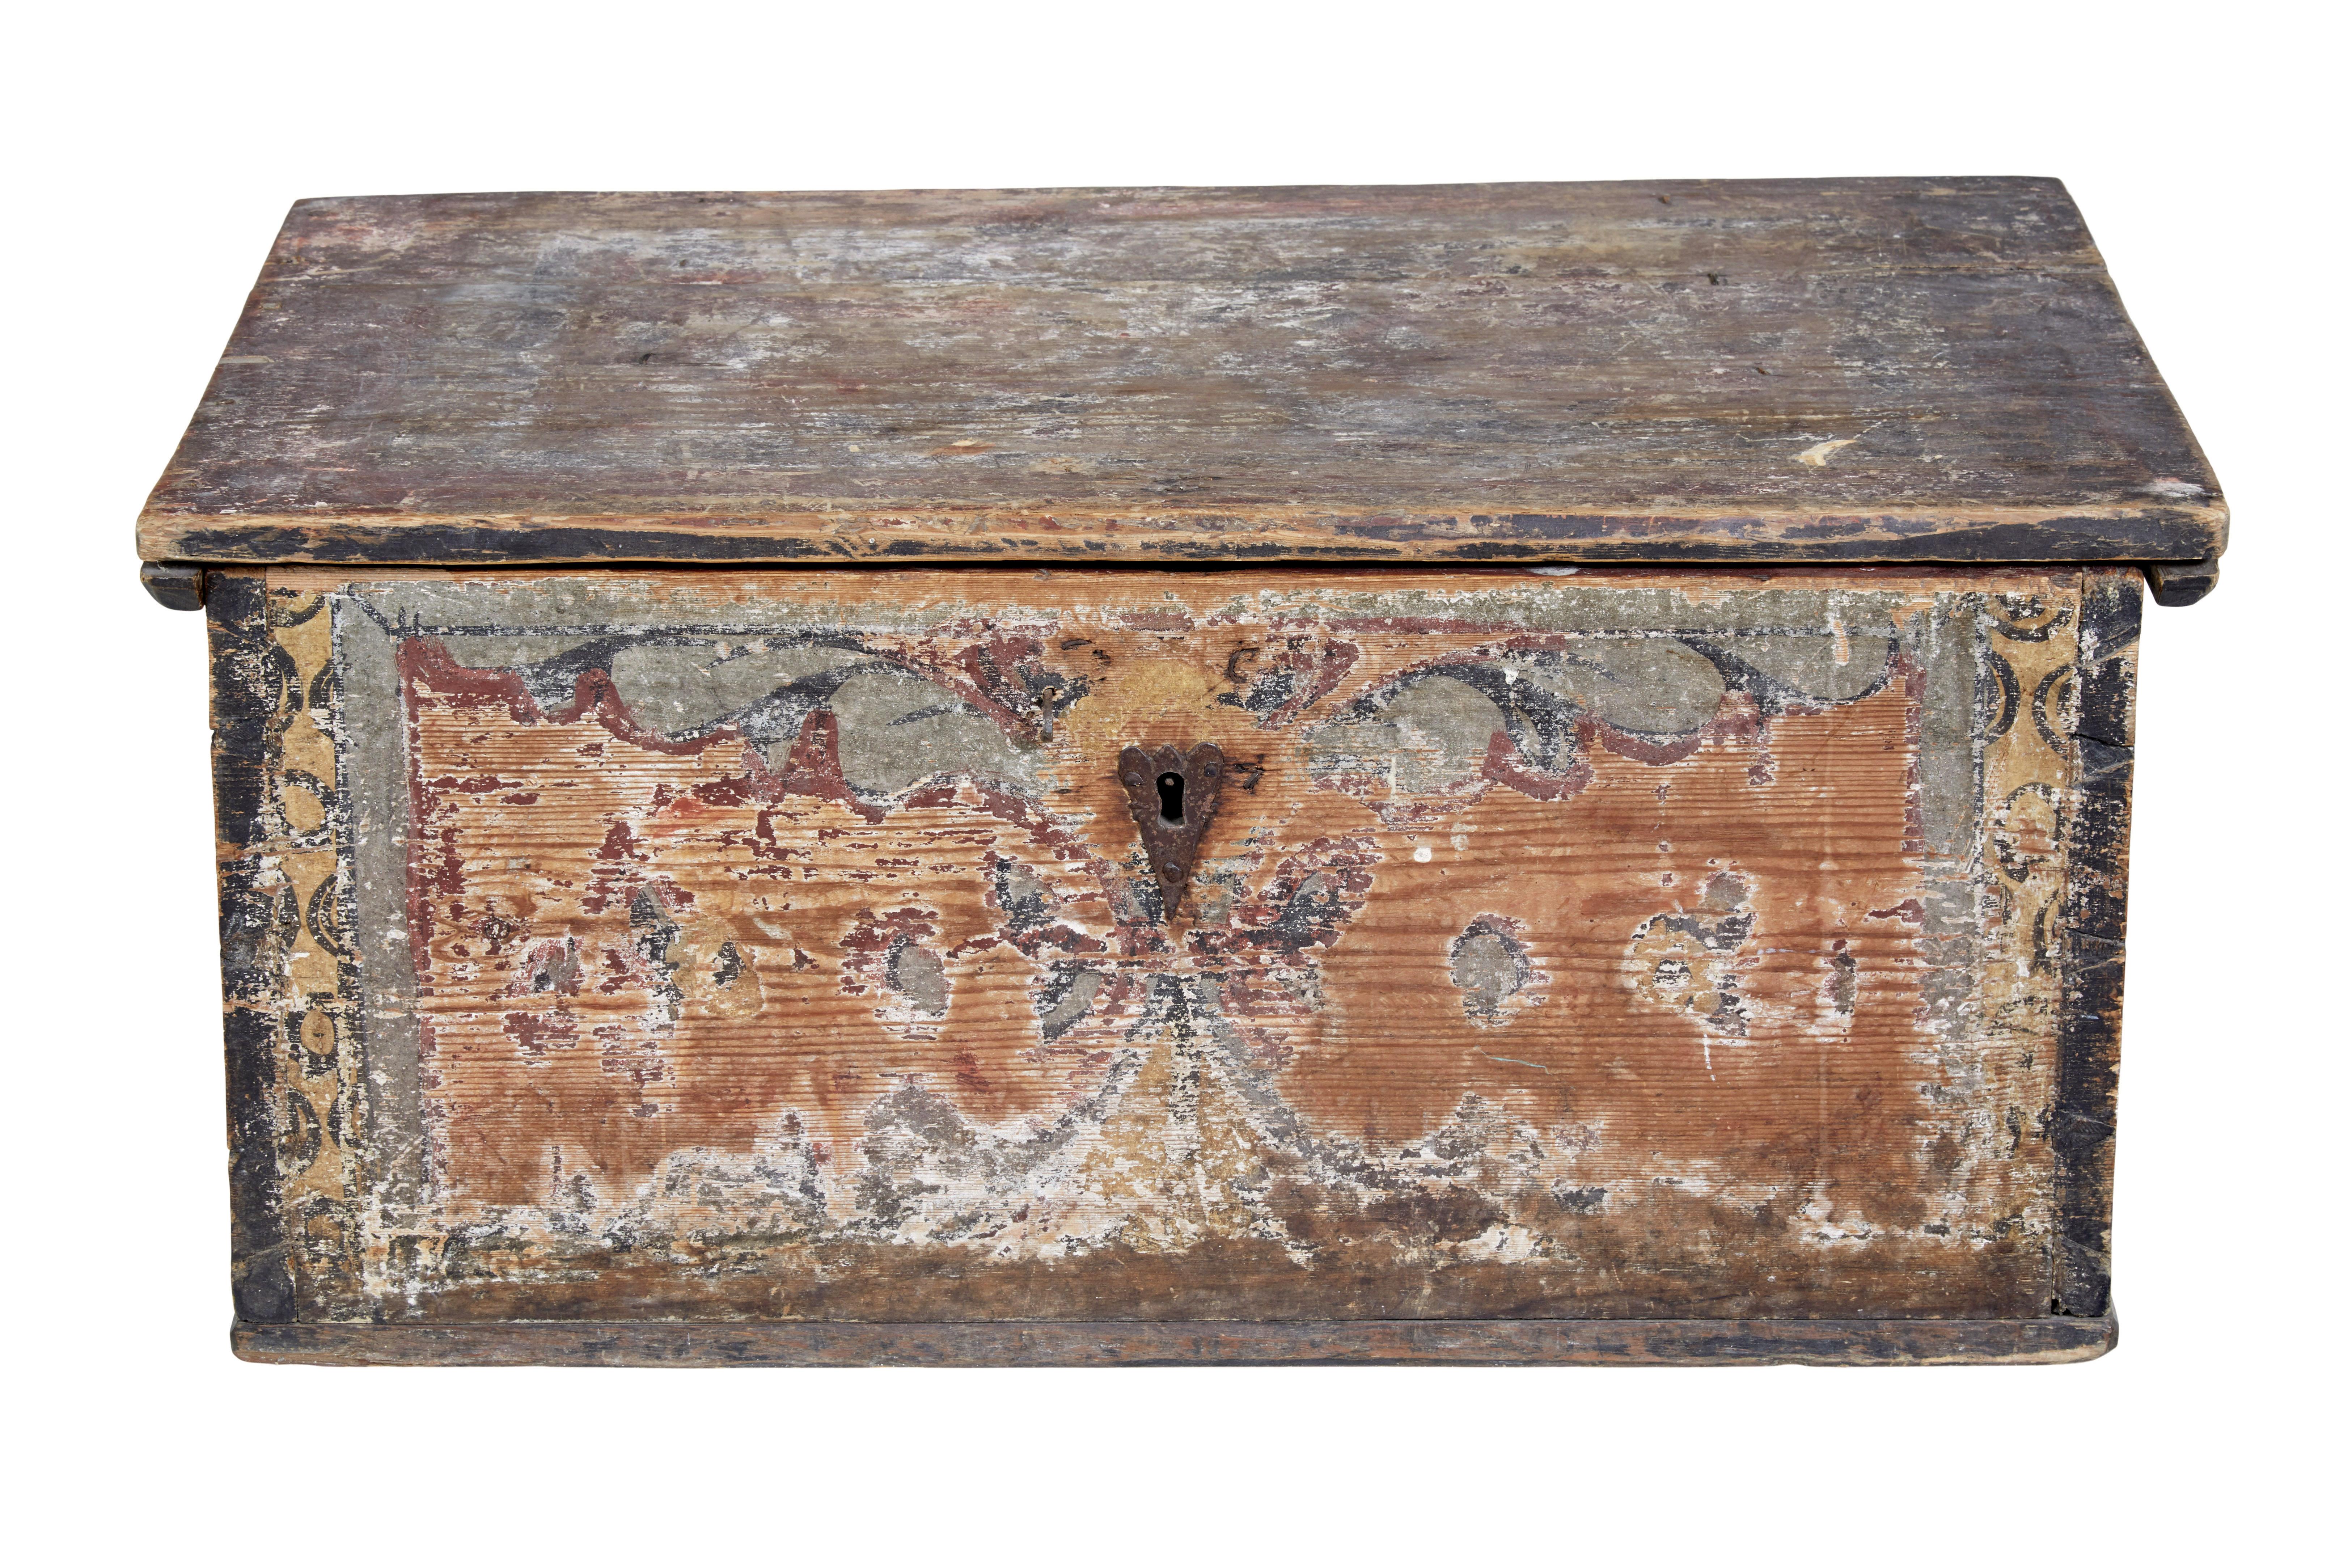 Mid-18th century hand painted traditional Swedish chest/box, circa 1750.

Stunning traditional Swedish box hand painted in the original paintwork. Decorated on all sides with swags in russet red/grey and yellow's. Complete with original hinges,